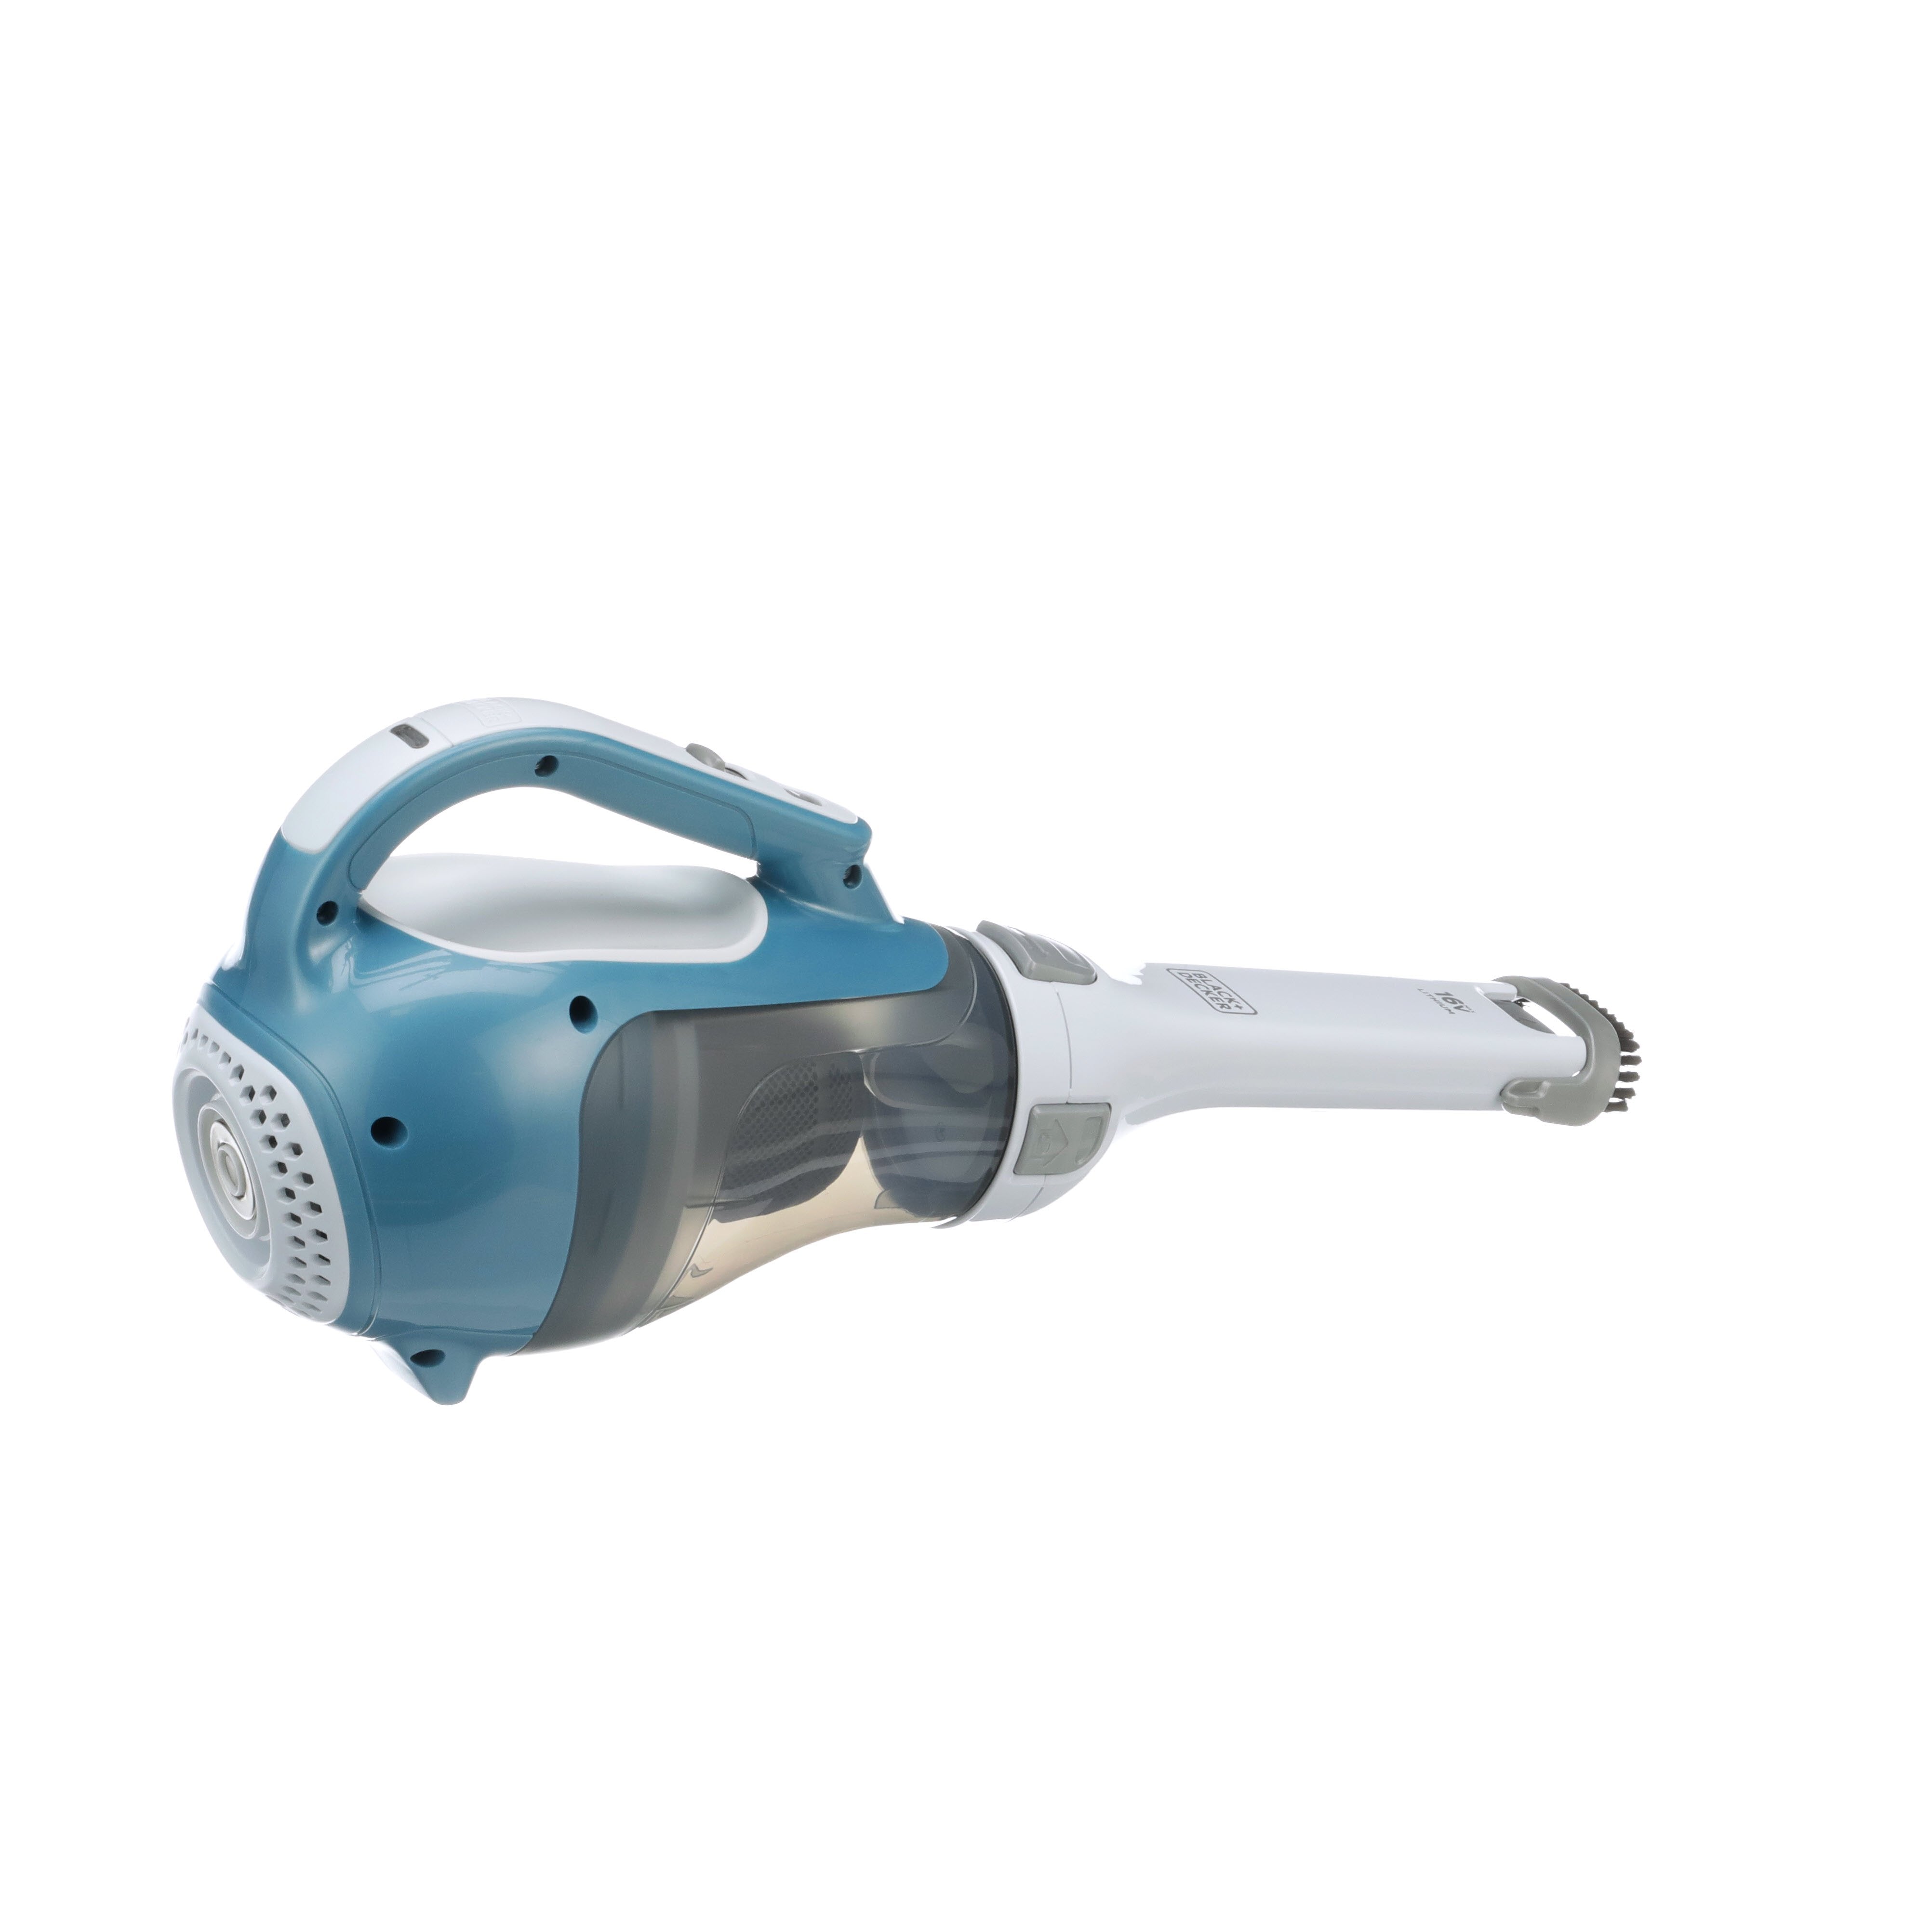 Black and Decker 14.4 V Lithium Ion Dustbuster CHV1410L from Black